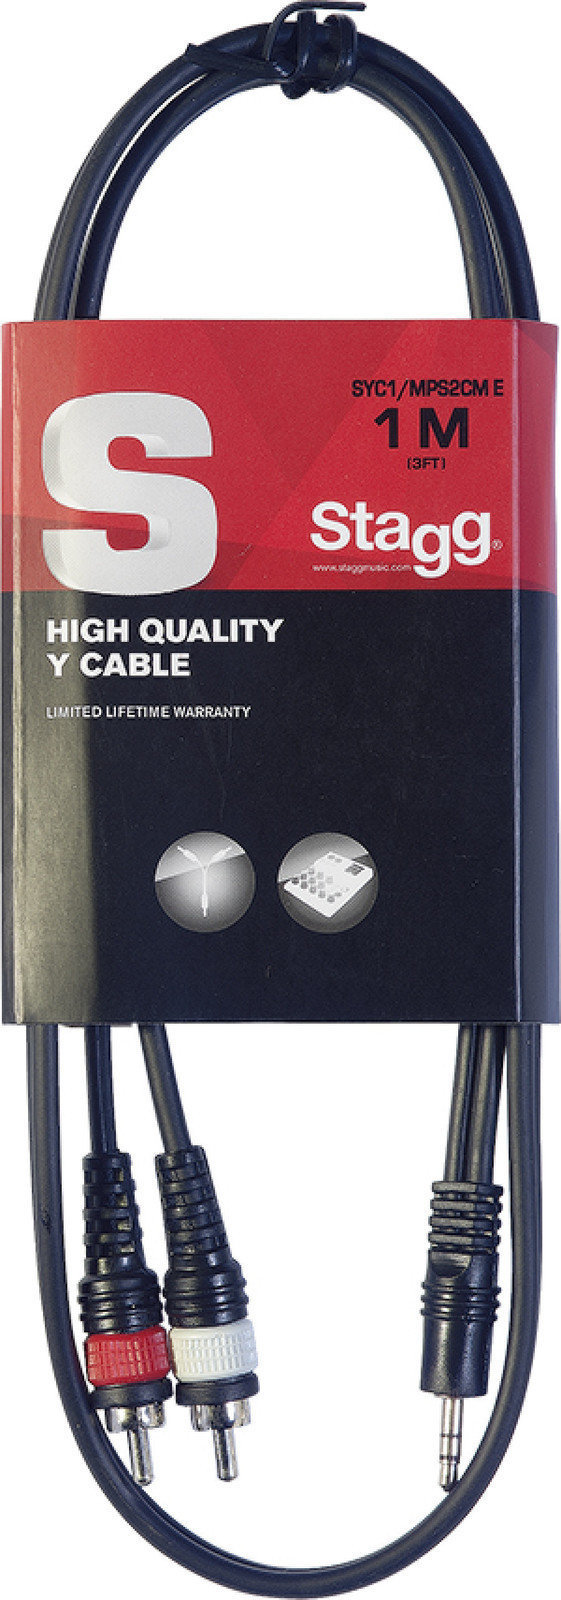 Kabel Audio Stagg SYC1/MPS2CM E 1 m Kabel Audio